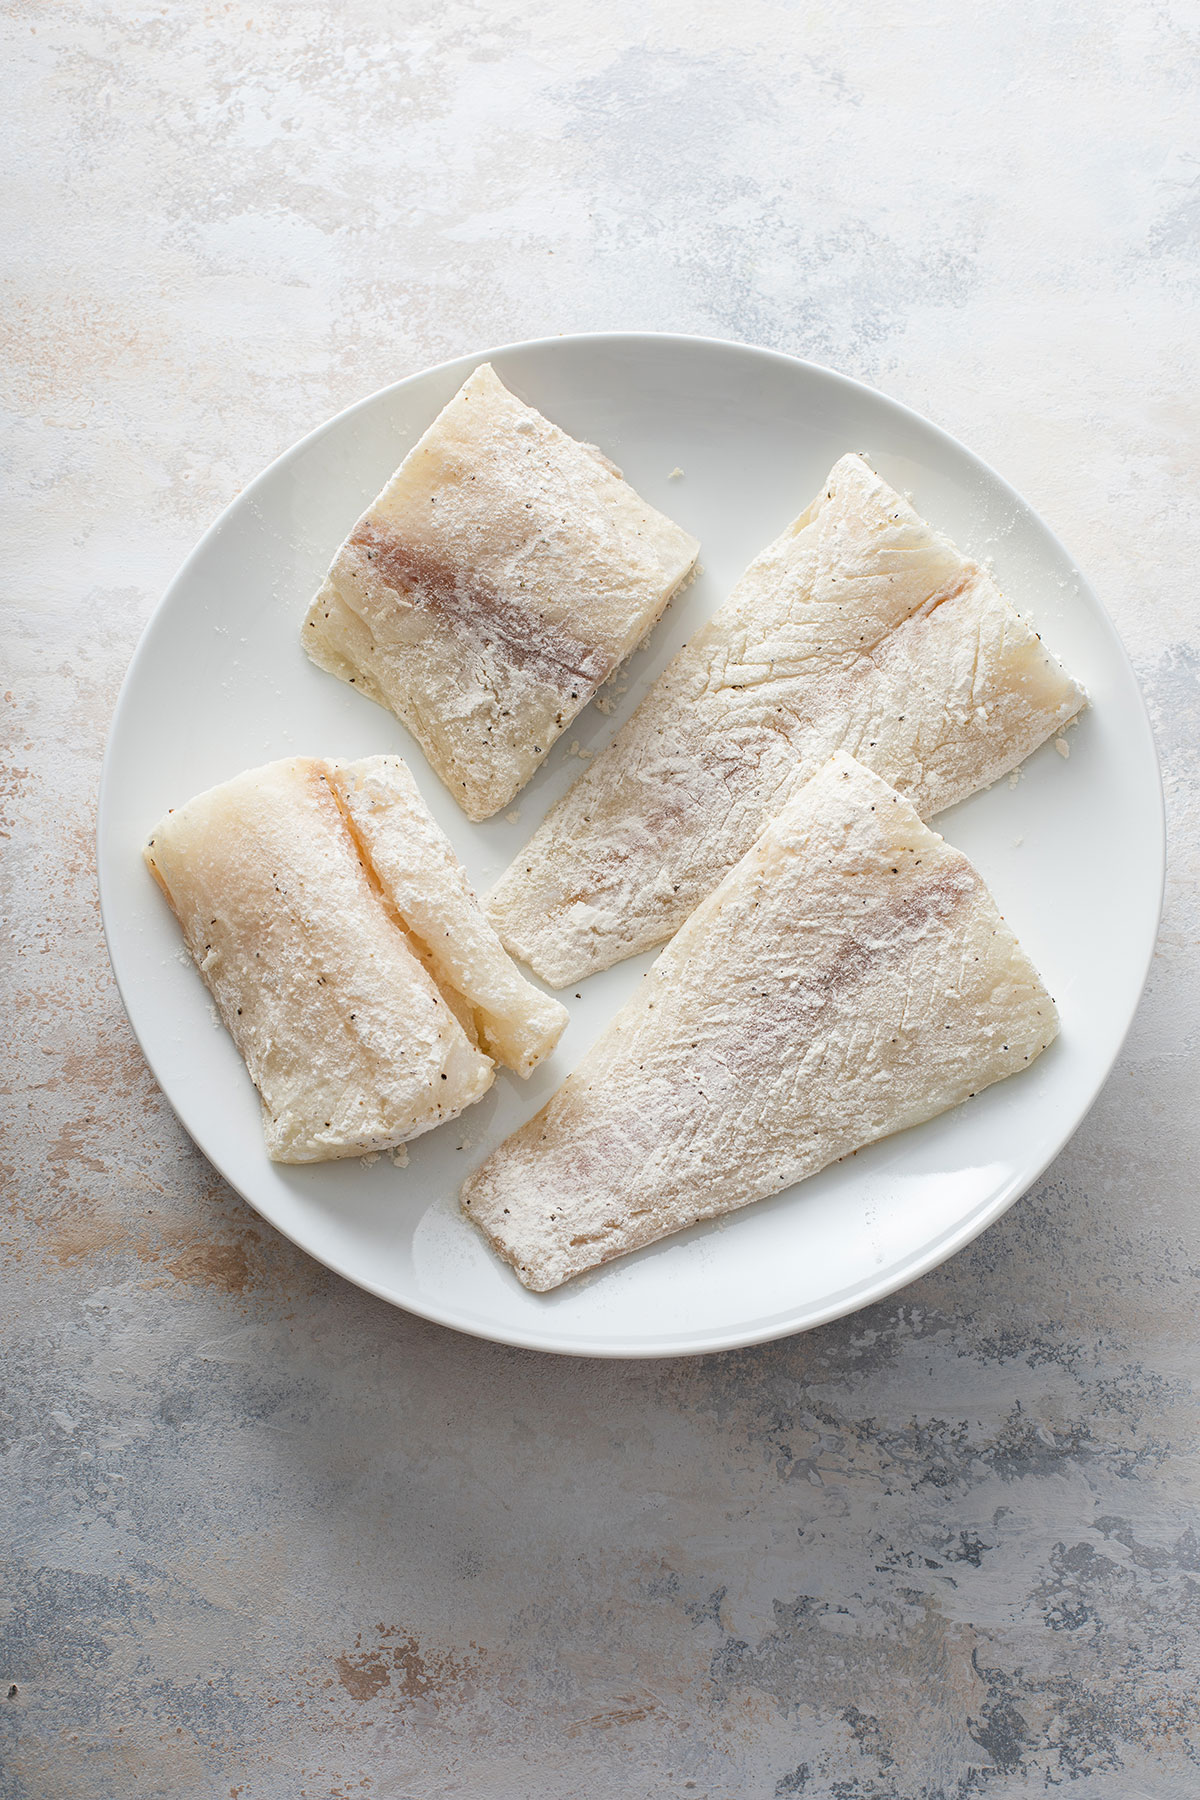 Flour coated cod fillets on a plate